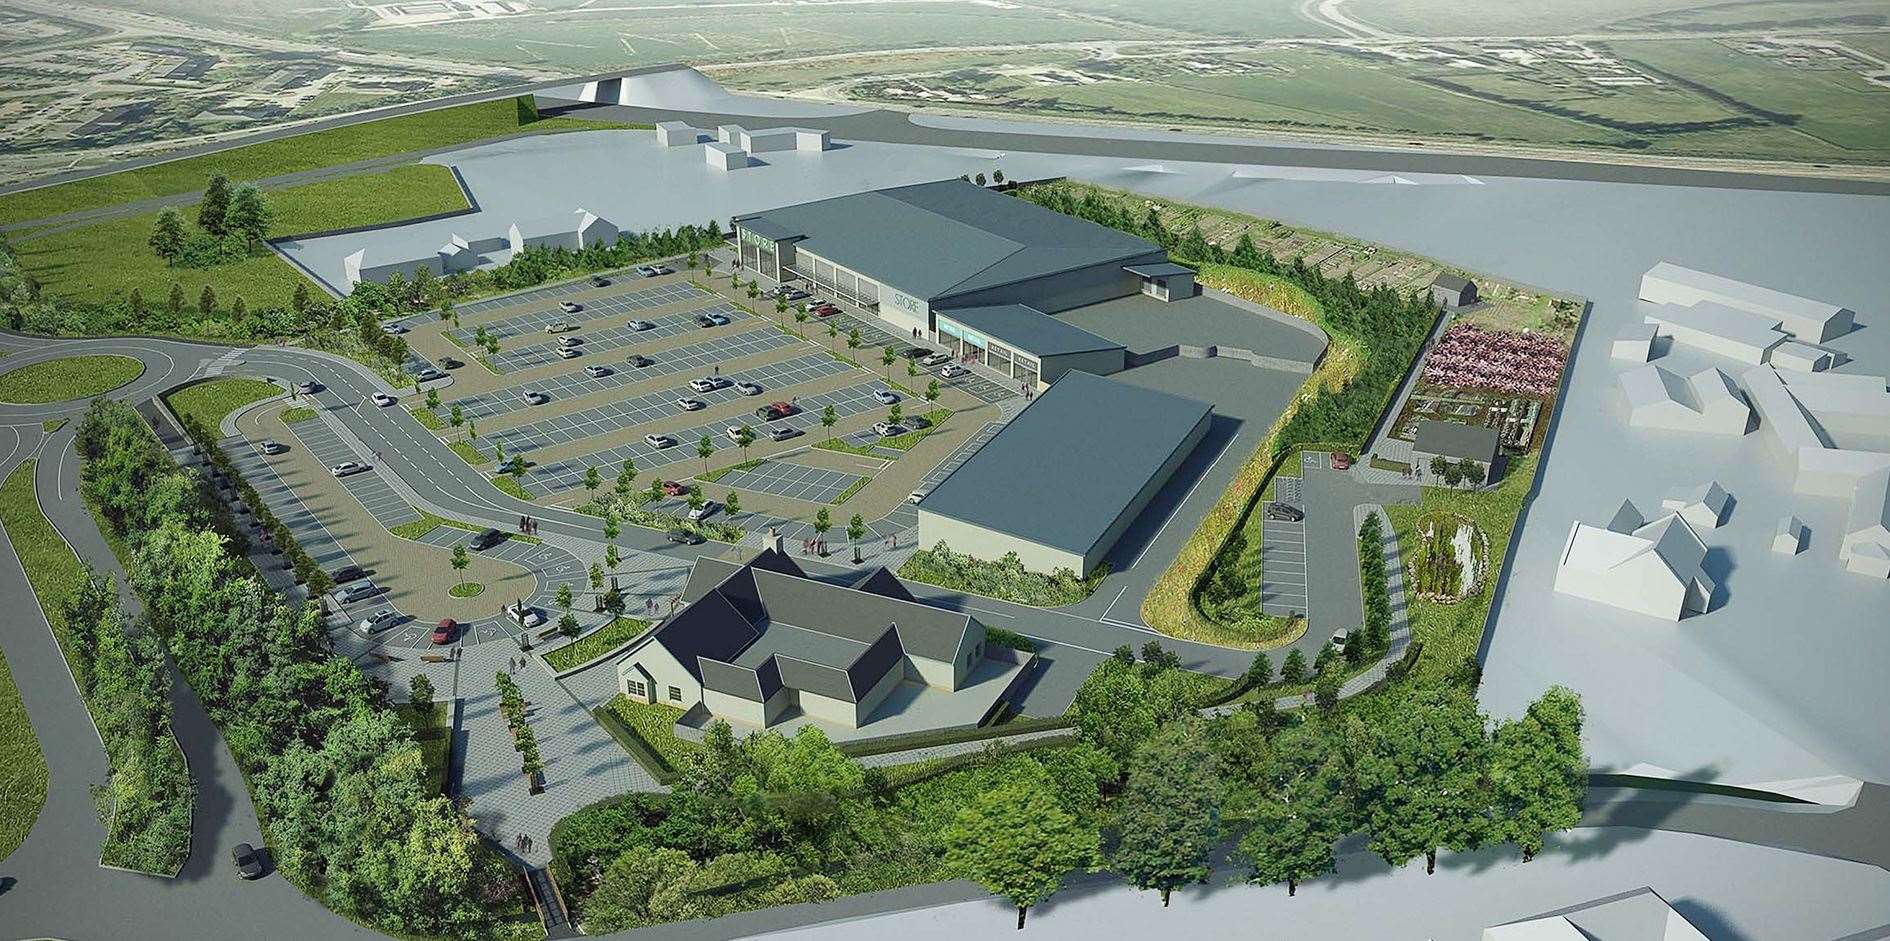 Permission is being sought for a three-year extension of planning permission to expand the retail park at Inshes.